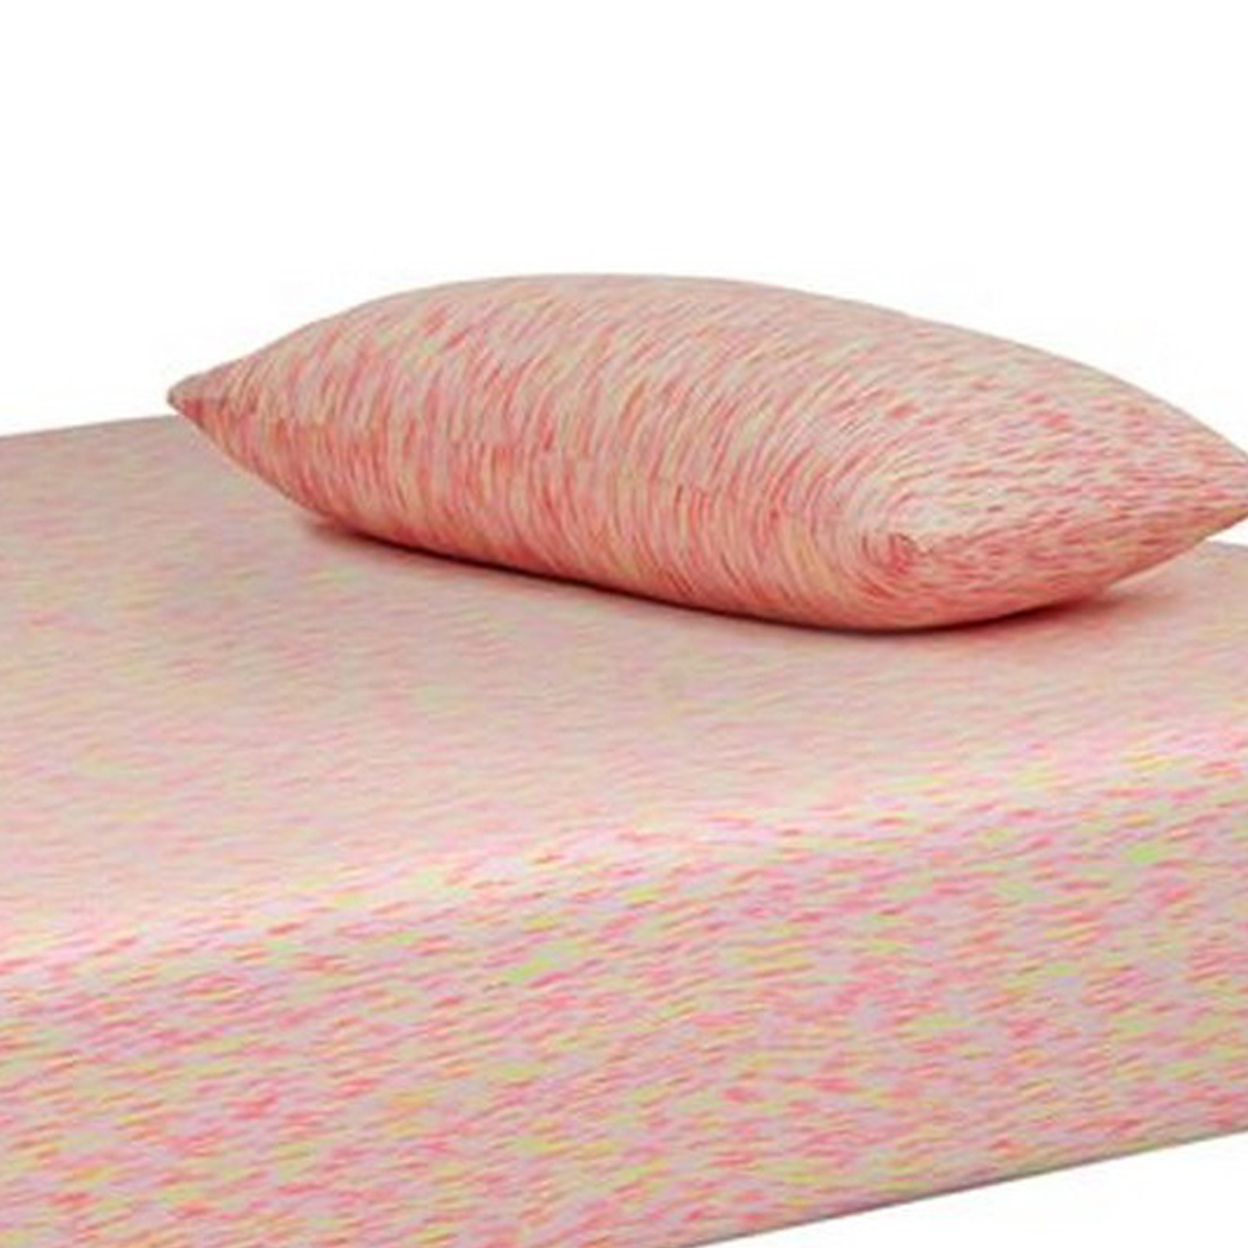 Twin Size Mattress With Hyperstretch Knit Cover And Pillow, Pink- Saltoro Sherpi